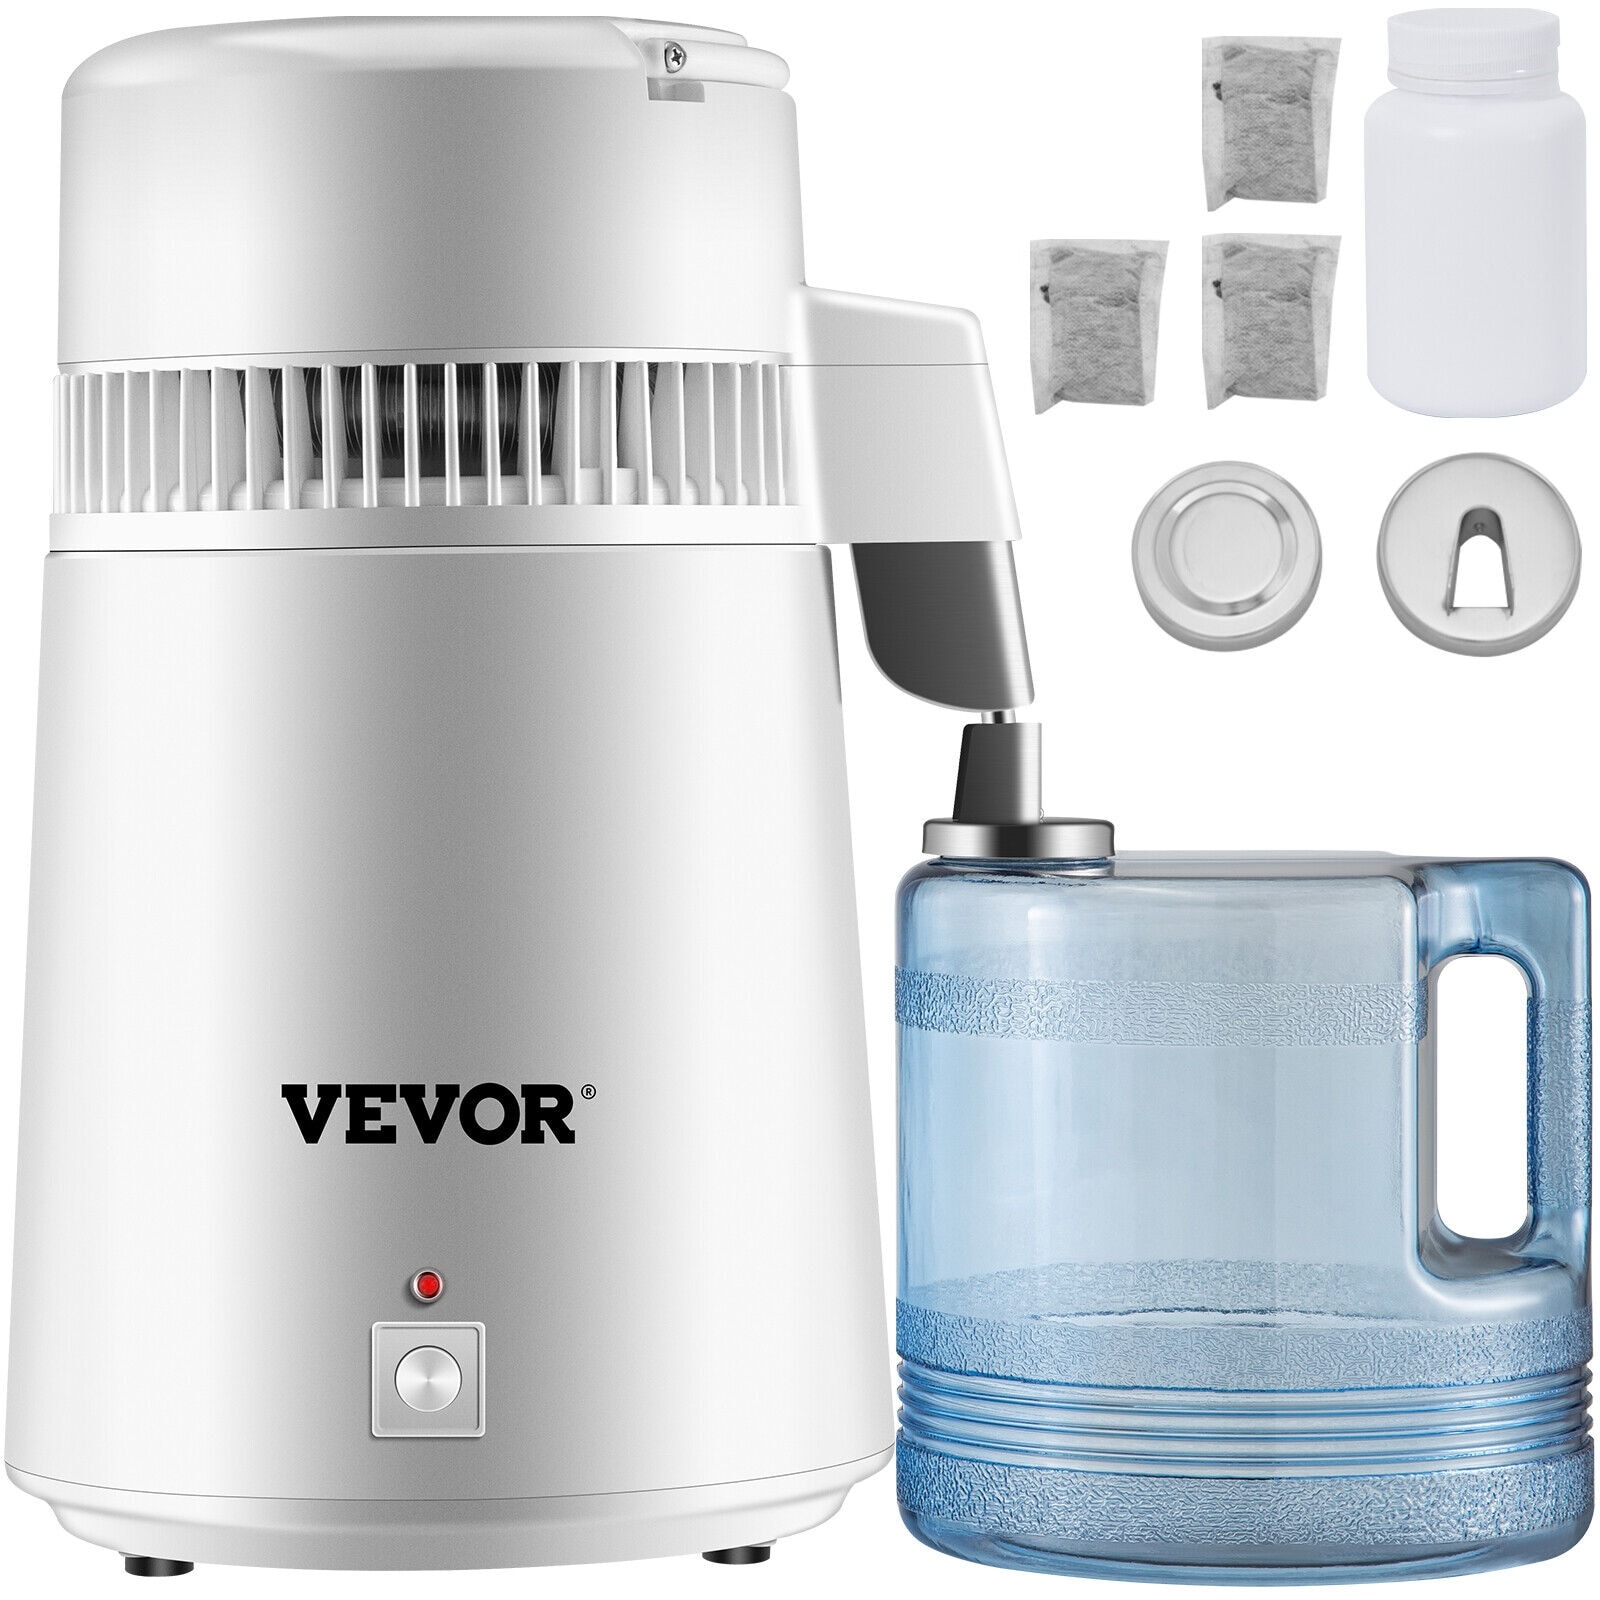 https://ak1.ostkcdn.com/images/products/is/images/direct/3f5d710bdbfb2c4282c913ac80bc56004a7abac3/VEVOR-Pure-Water-Distiller-Purifier-Filter-1.1-Gal--4L-750W-Fully-Upgraded-with-Handle-BPA-Free-Container-Home-Use-White.jpg